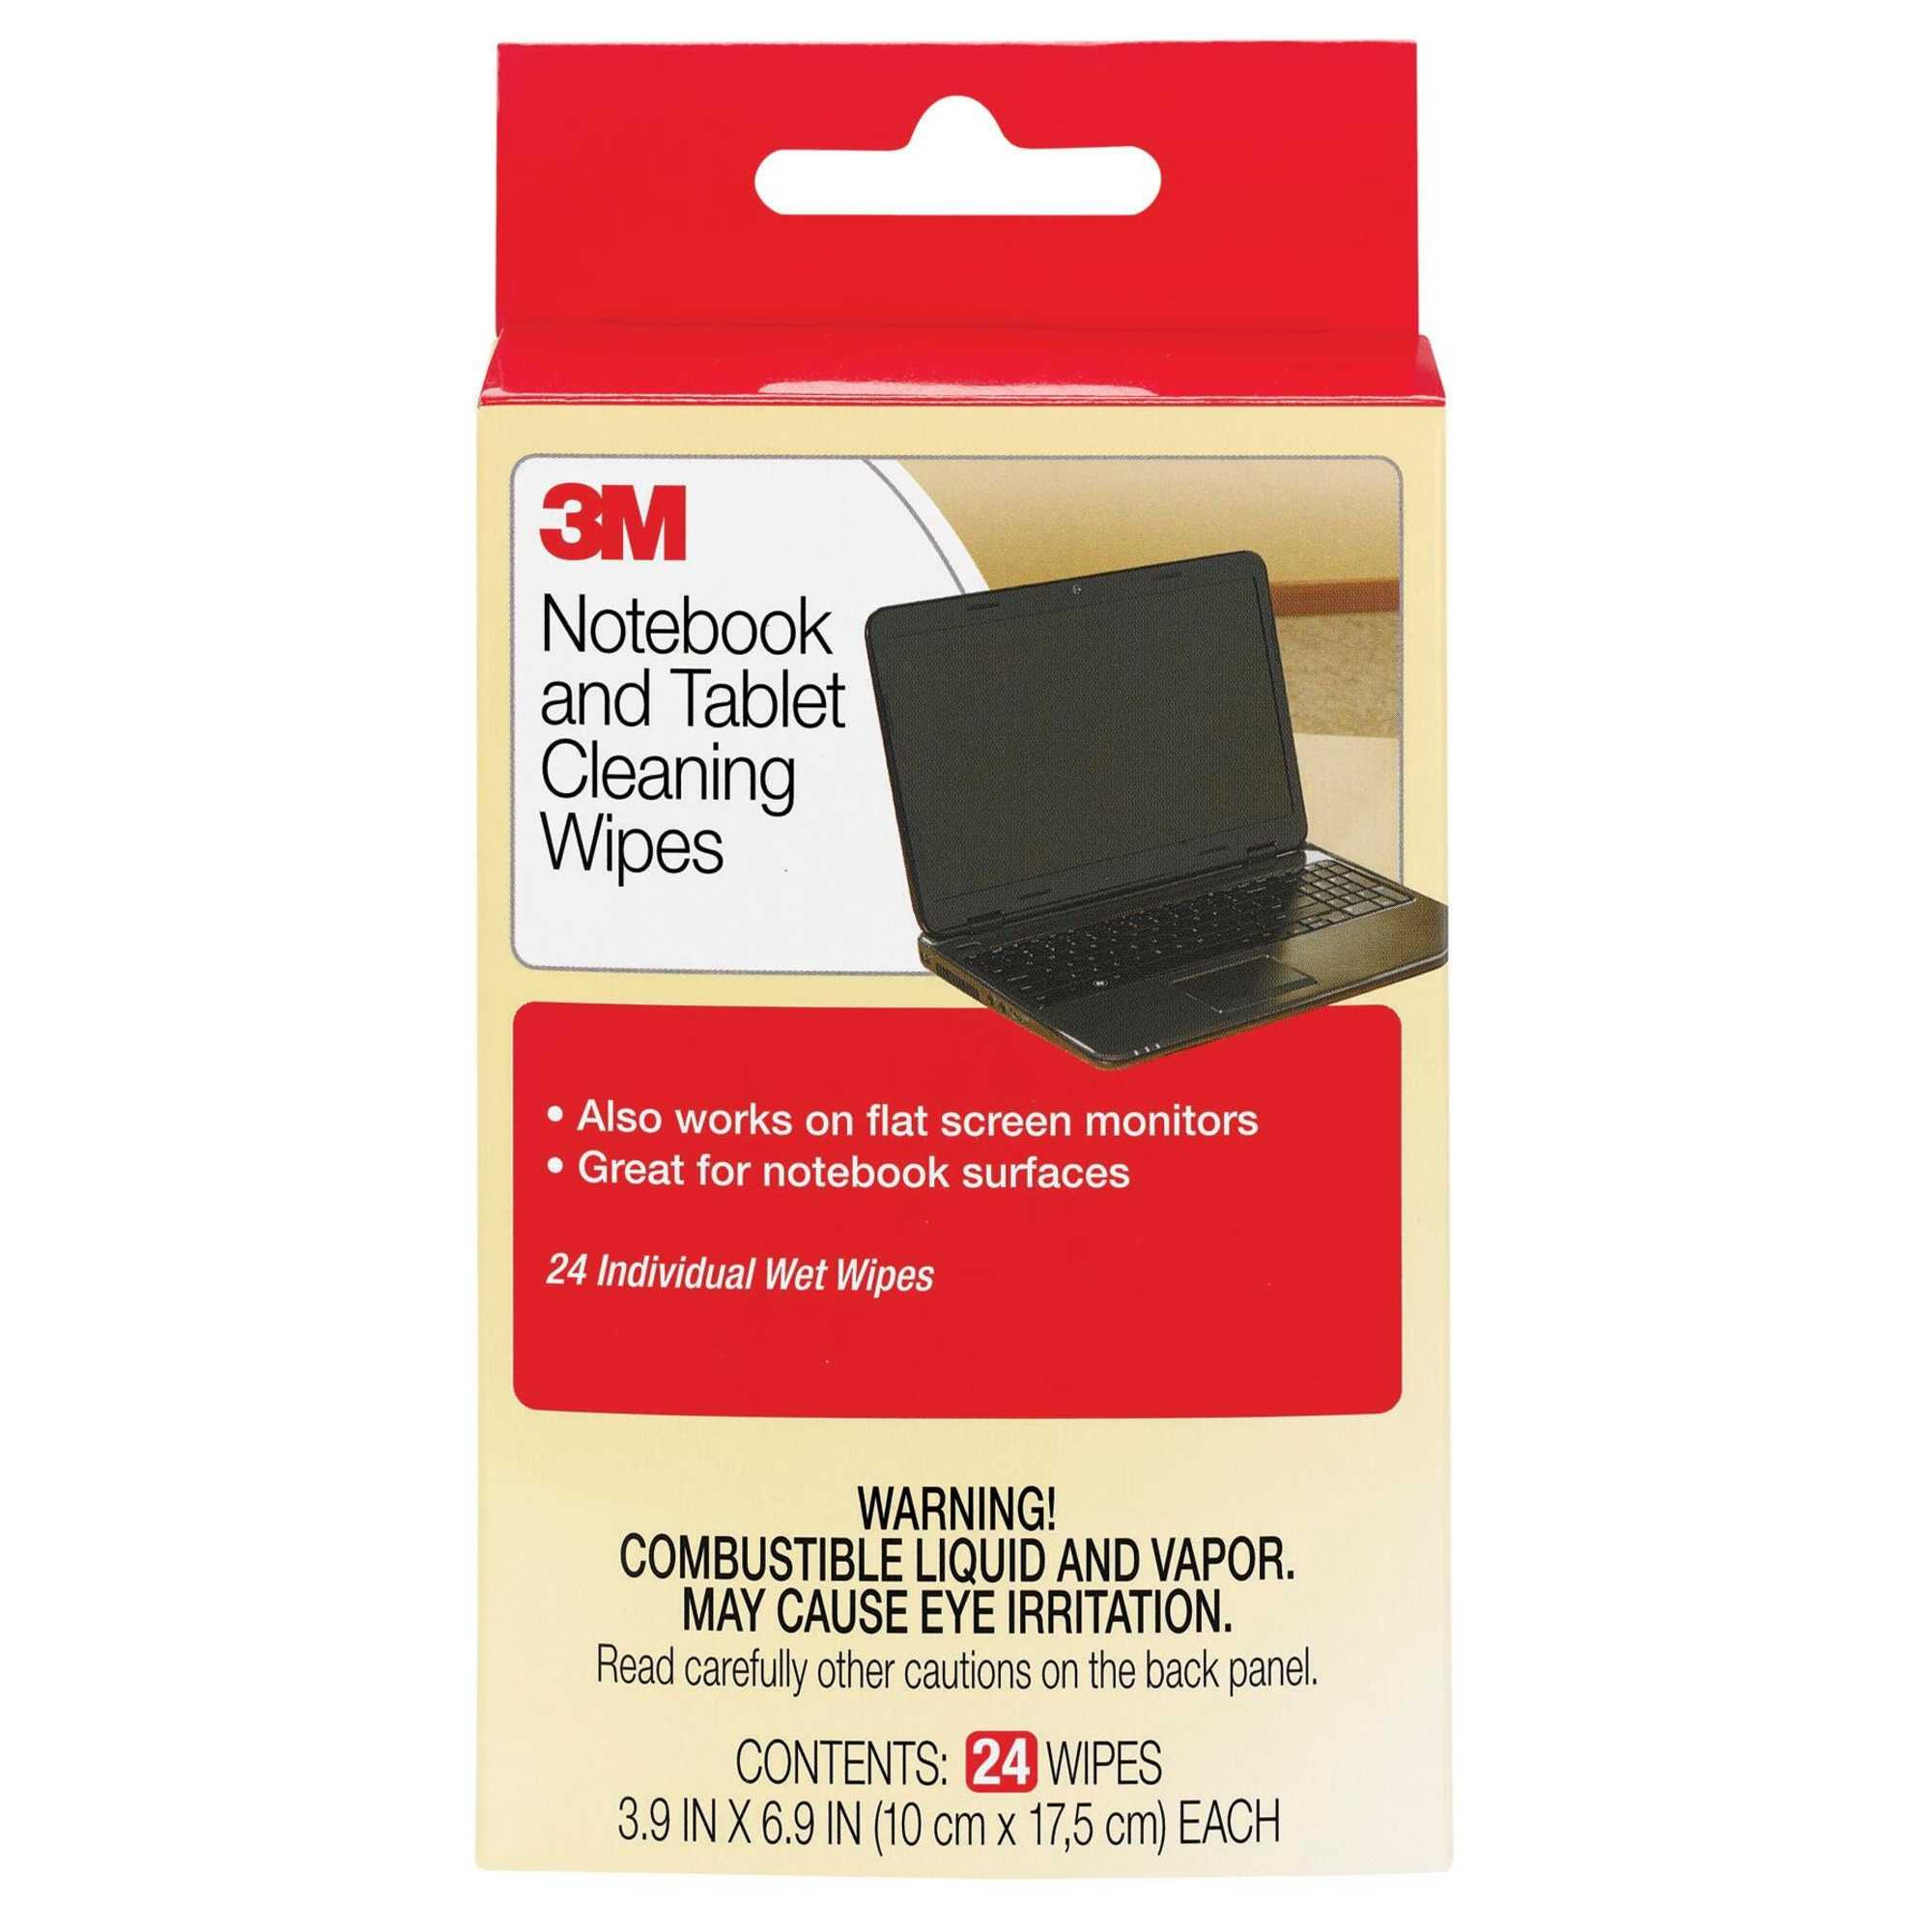 3M Pre-Moistened Notebook Screen Cleaning Wipes, 4 x 7 Inches, White, Pack of 24 - image 1 of 2